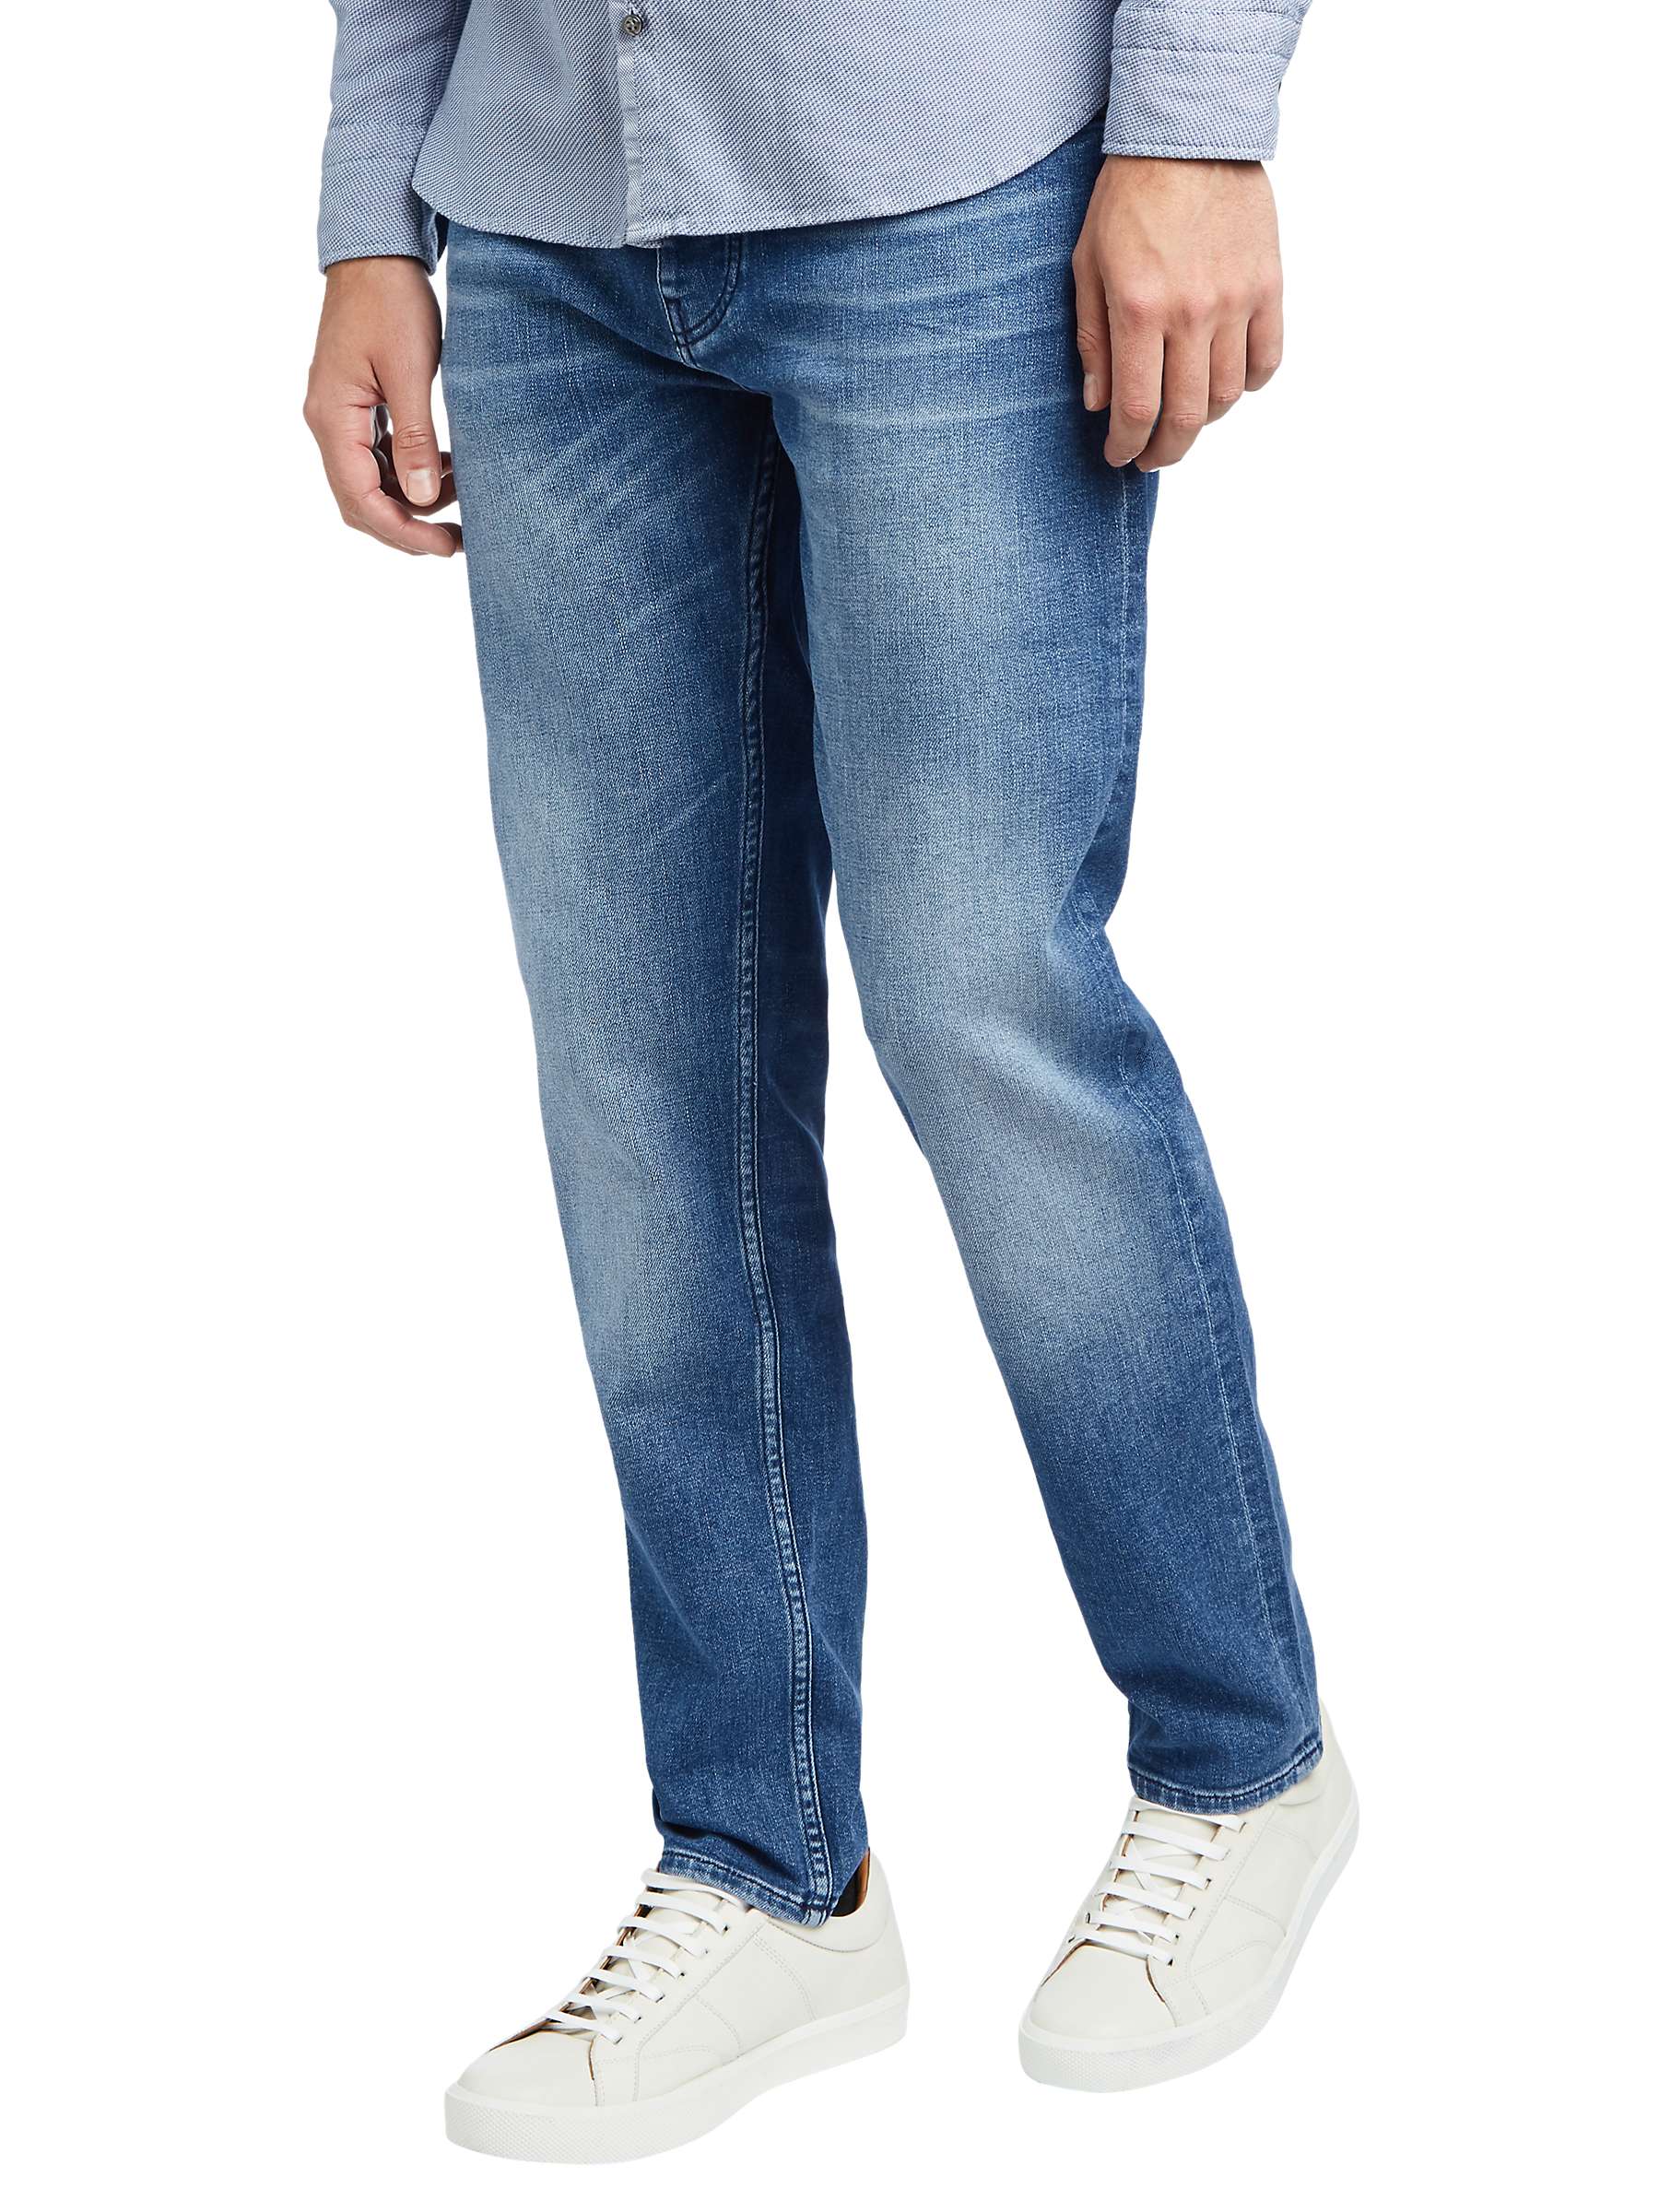 BOSS Taber BC Tapered Fit Jeans at John Lewis & Partners